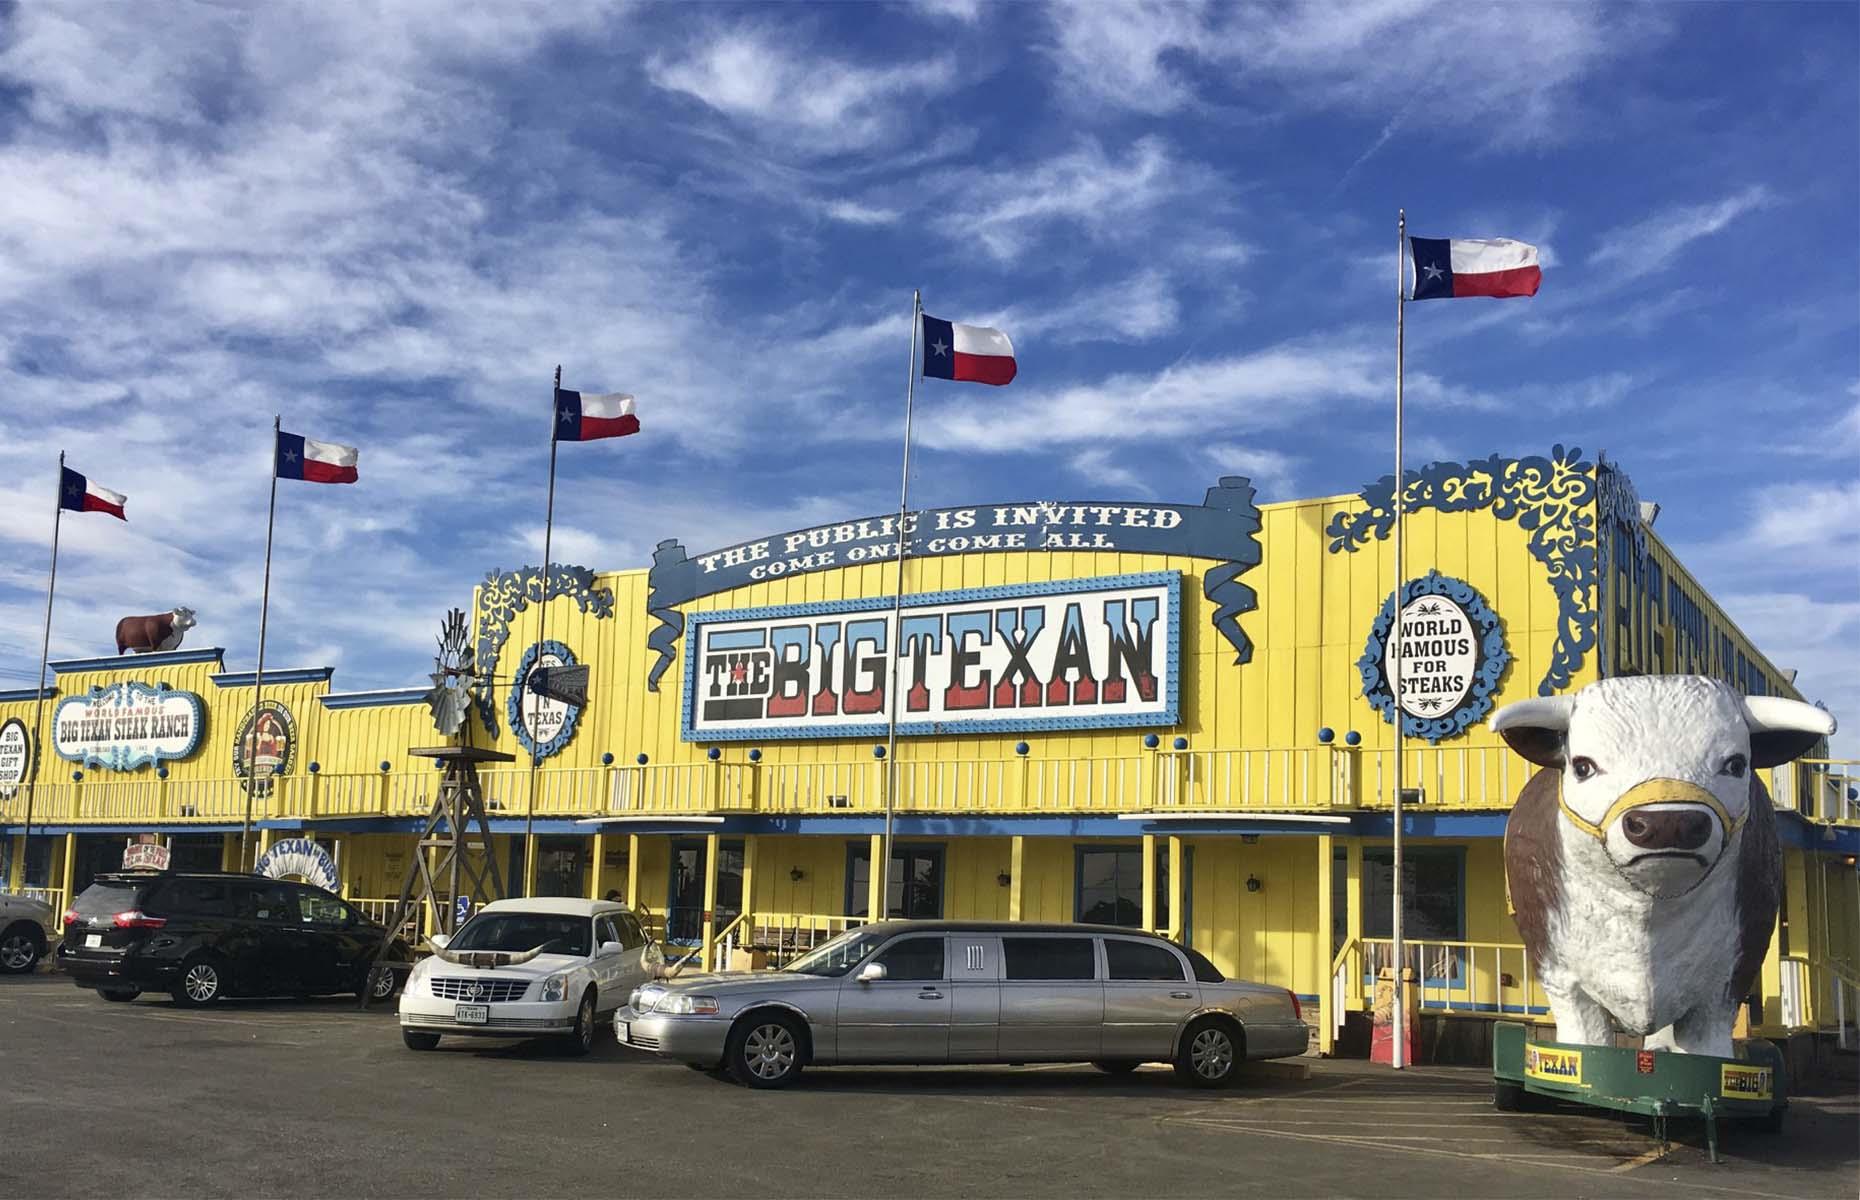 <p>There’s no way you can miss this loud 'n' proud diner on I-40 in Amarillo. It's painted bright yellow and there are massive billboards and statues alerting passers-by to its location. It’s famous for its 72oz (2kg) steak, <a href="https://www.bigtexan.com/72-oz-steak/">which is free</a> to anyone who can eat the entire meal in 60 minutes or less. Customers also love the <a href="https://www.yelp.com/biz/the-big-texan-steak-ranch-amarillo?sort_by=date_desc">free limo service</a> to nearby hotels and motels, it’s great if you fancy a drink with your meal.</p>